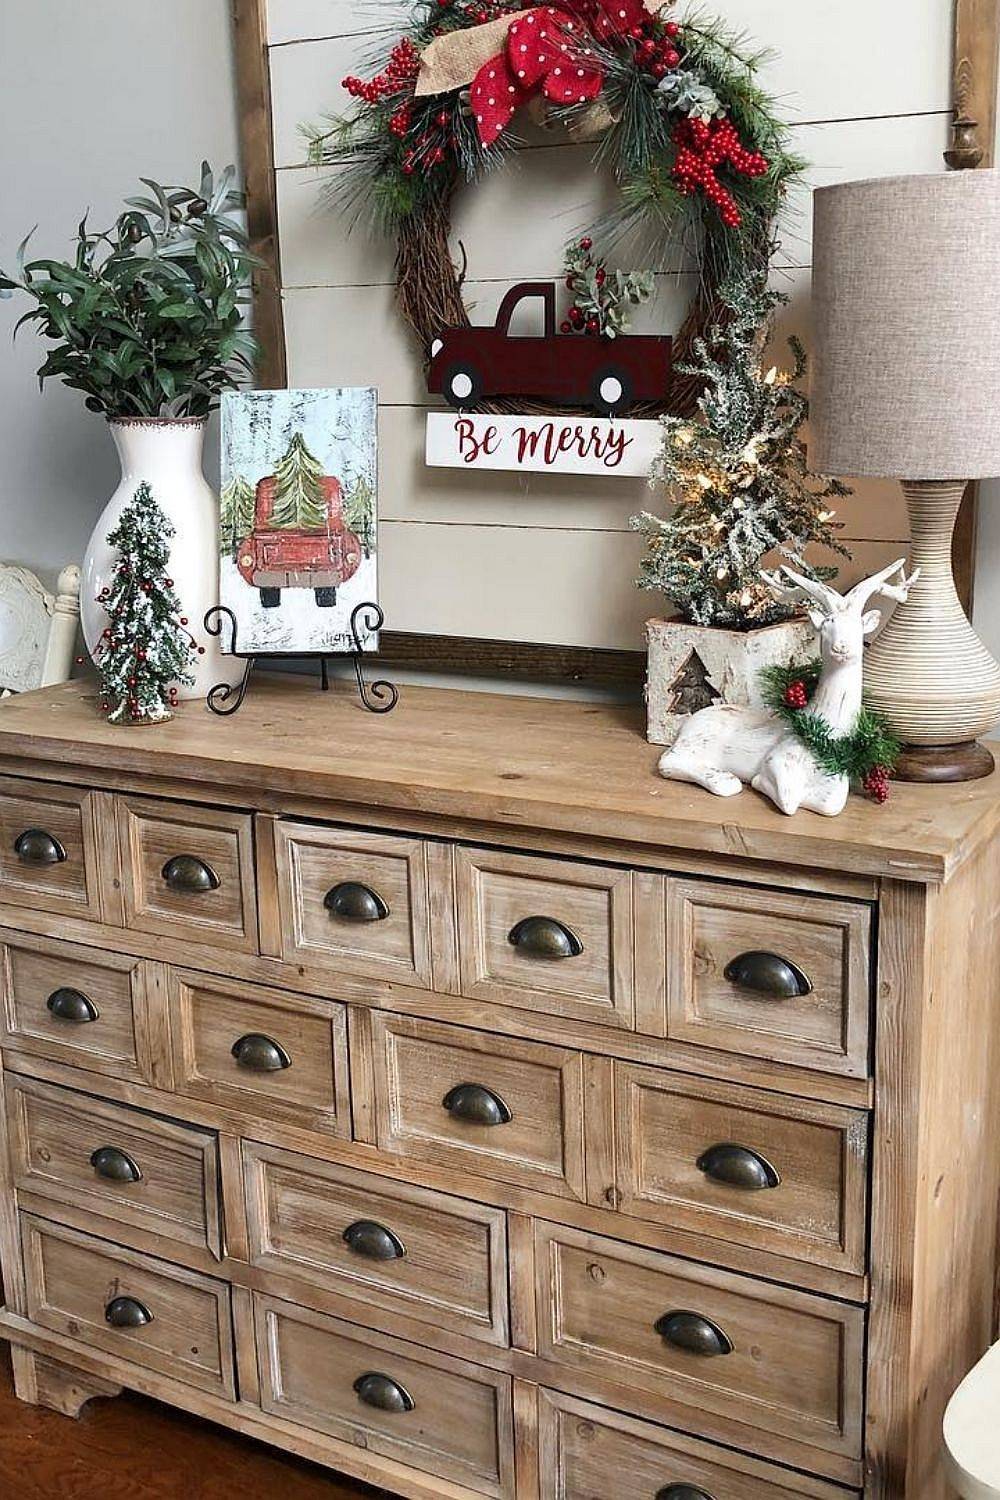 Wreath above the console table along with small illuminated Christmas trees bring festive joy to this entry